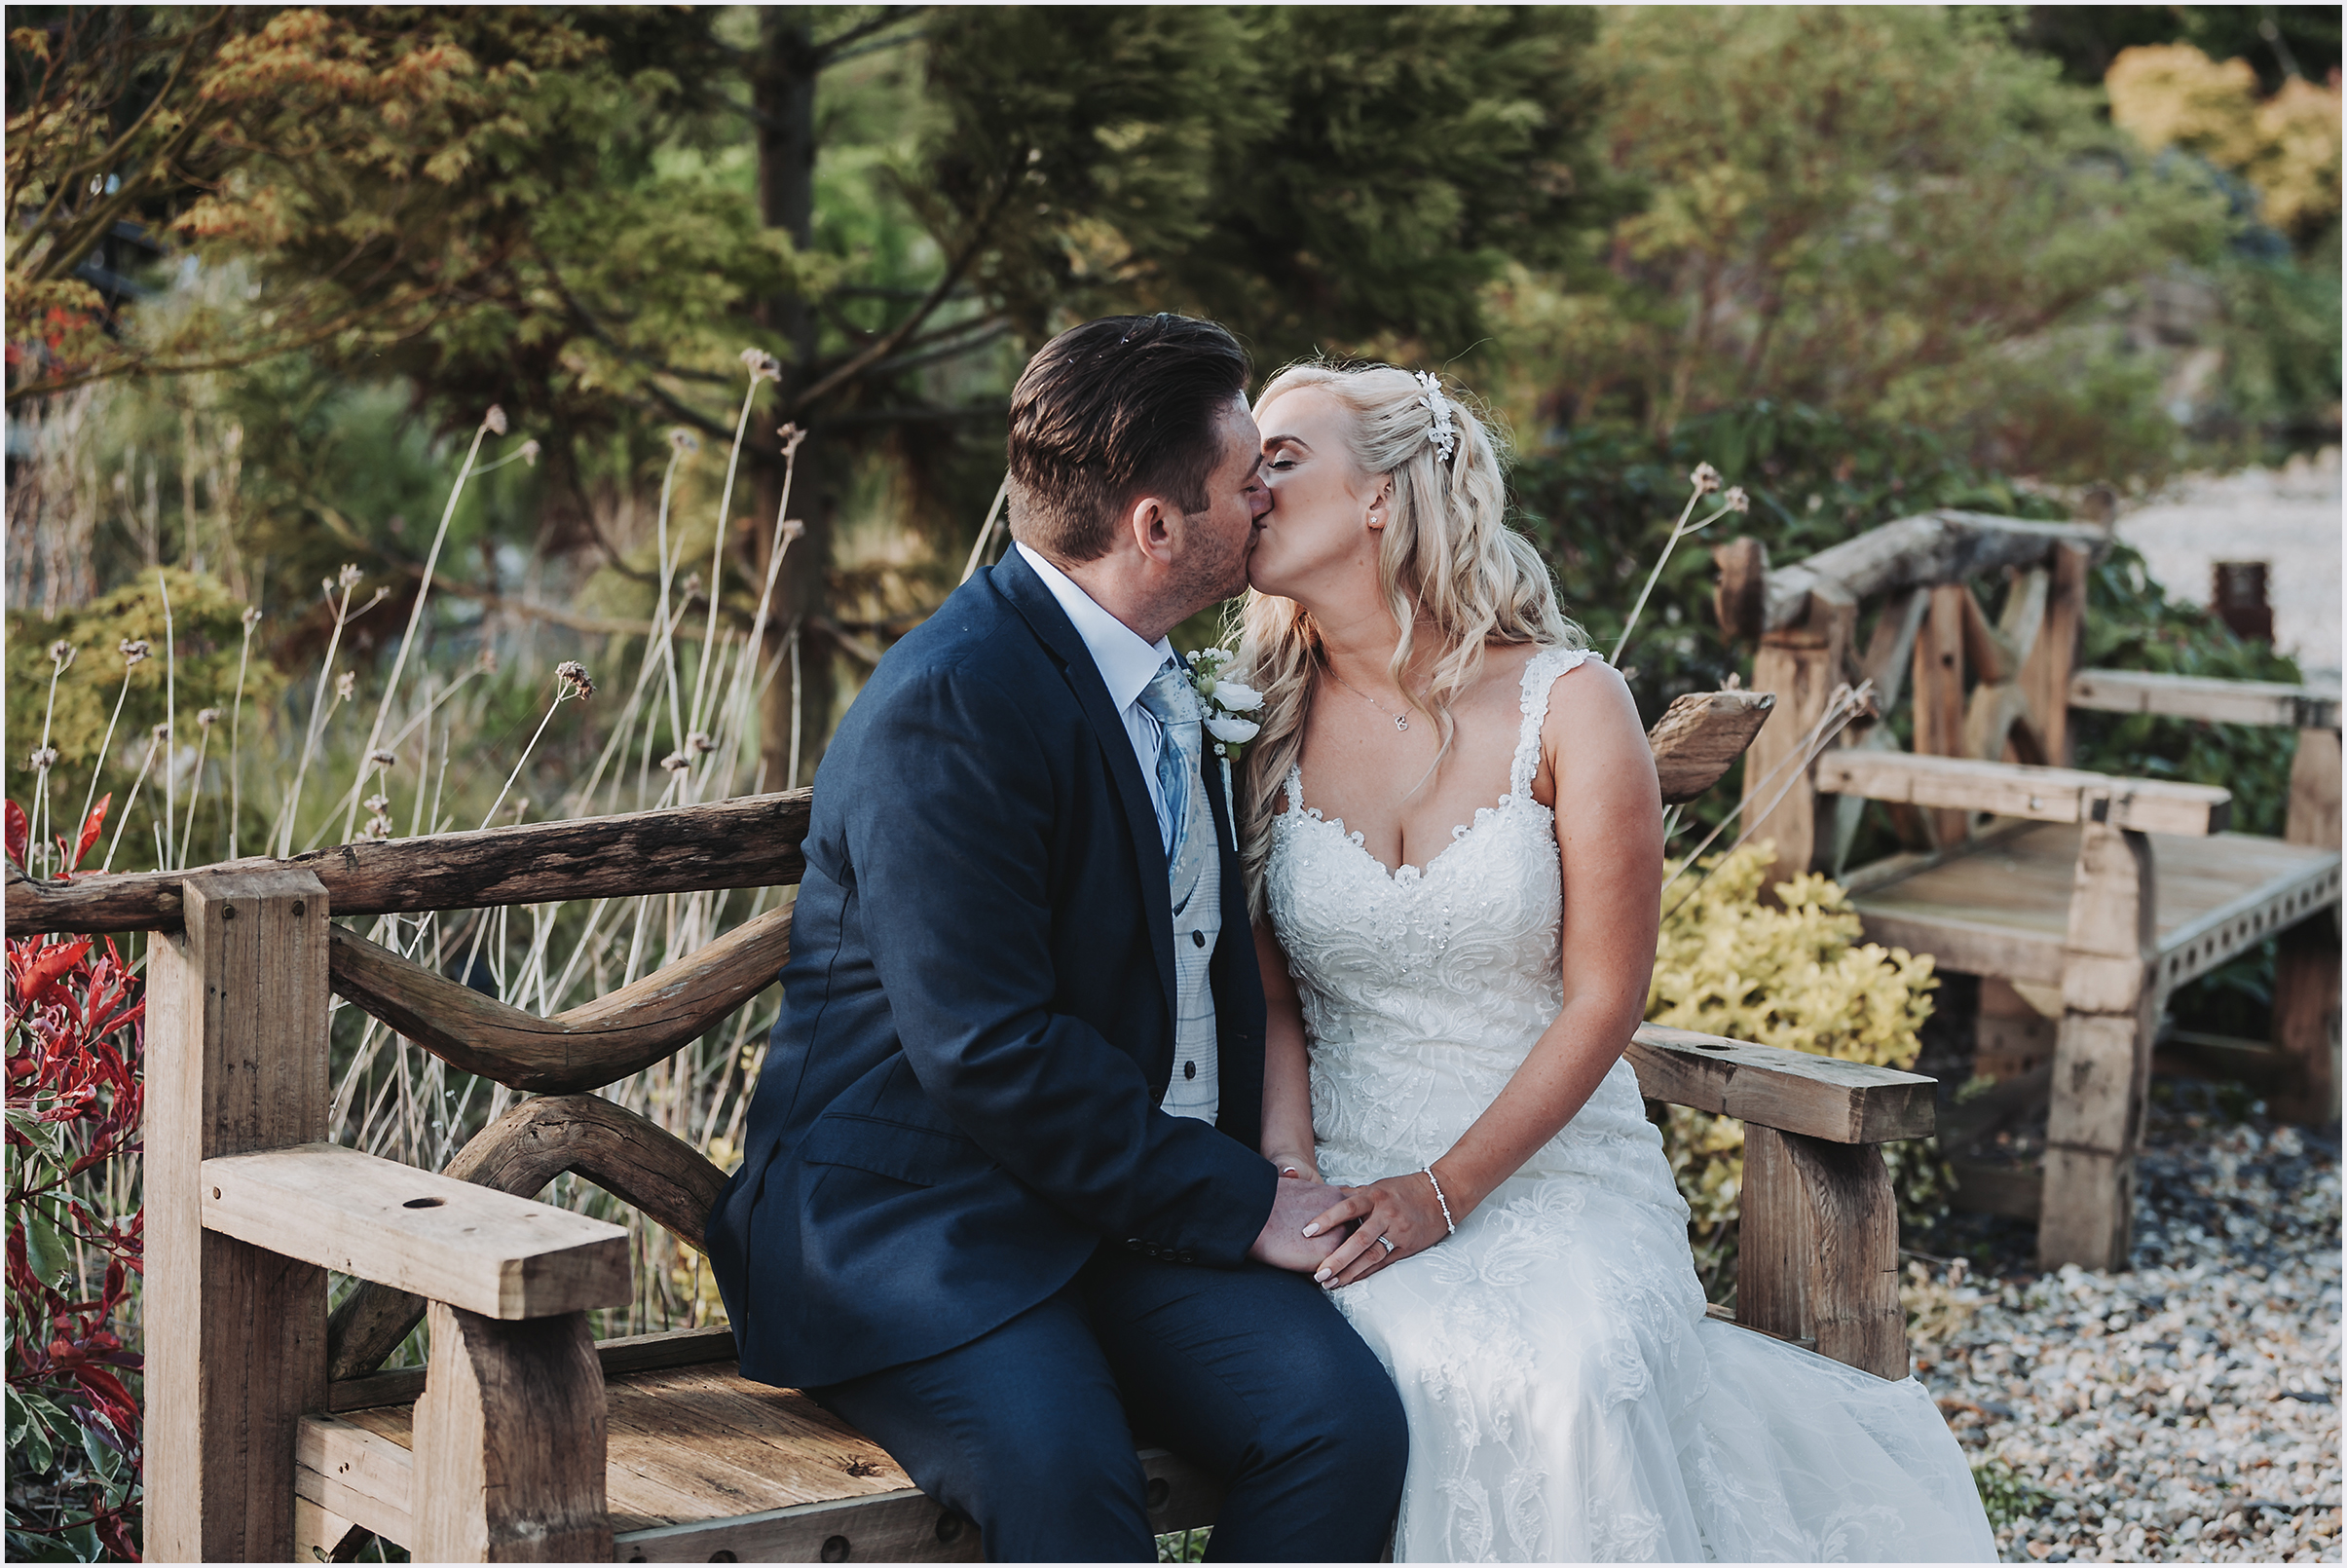 A newly married couple sitting on a beautiful wooden bench sharing a kiss in the Japanese Gardens at The Grosvenor Pulford Hotel and Spa.